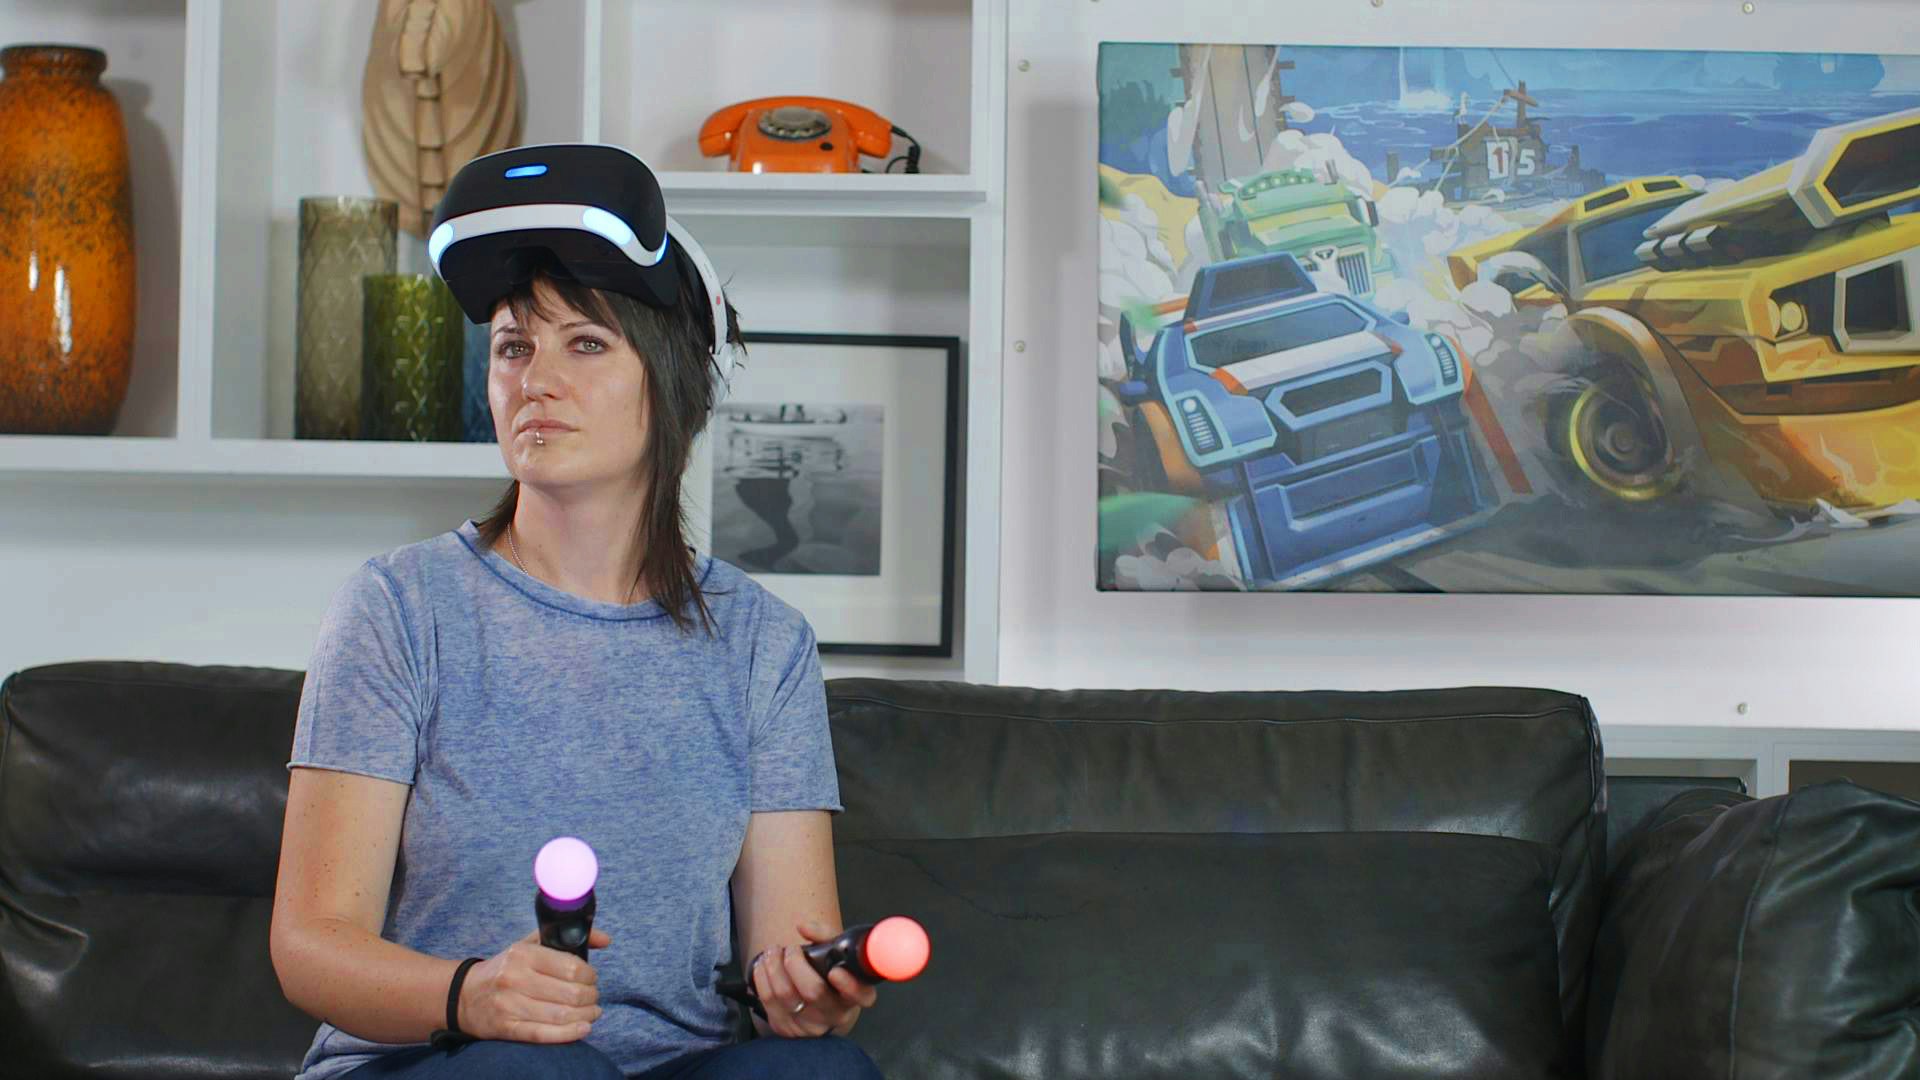 Actor Jodie Fink between takes on Big Egg's Futurlab trailer shoot, wearing Sony Playstation VR headset